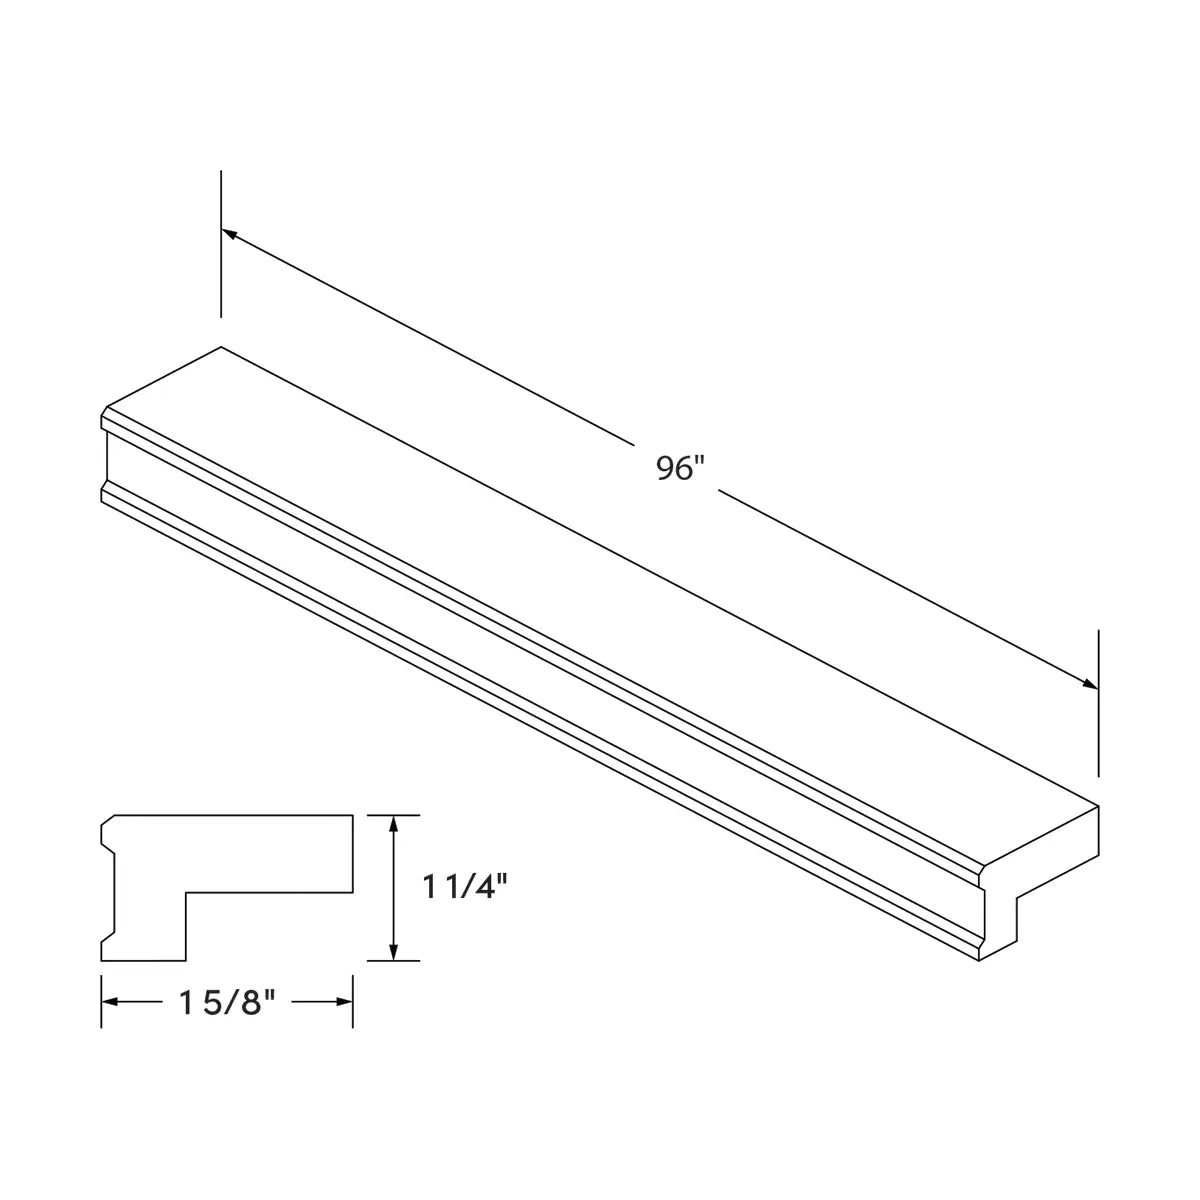 Craft Cabinetry Shaker Black Light Rail Straight Molding Image Specifications